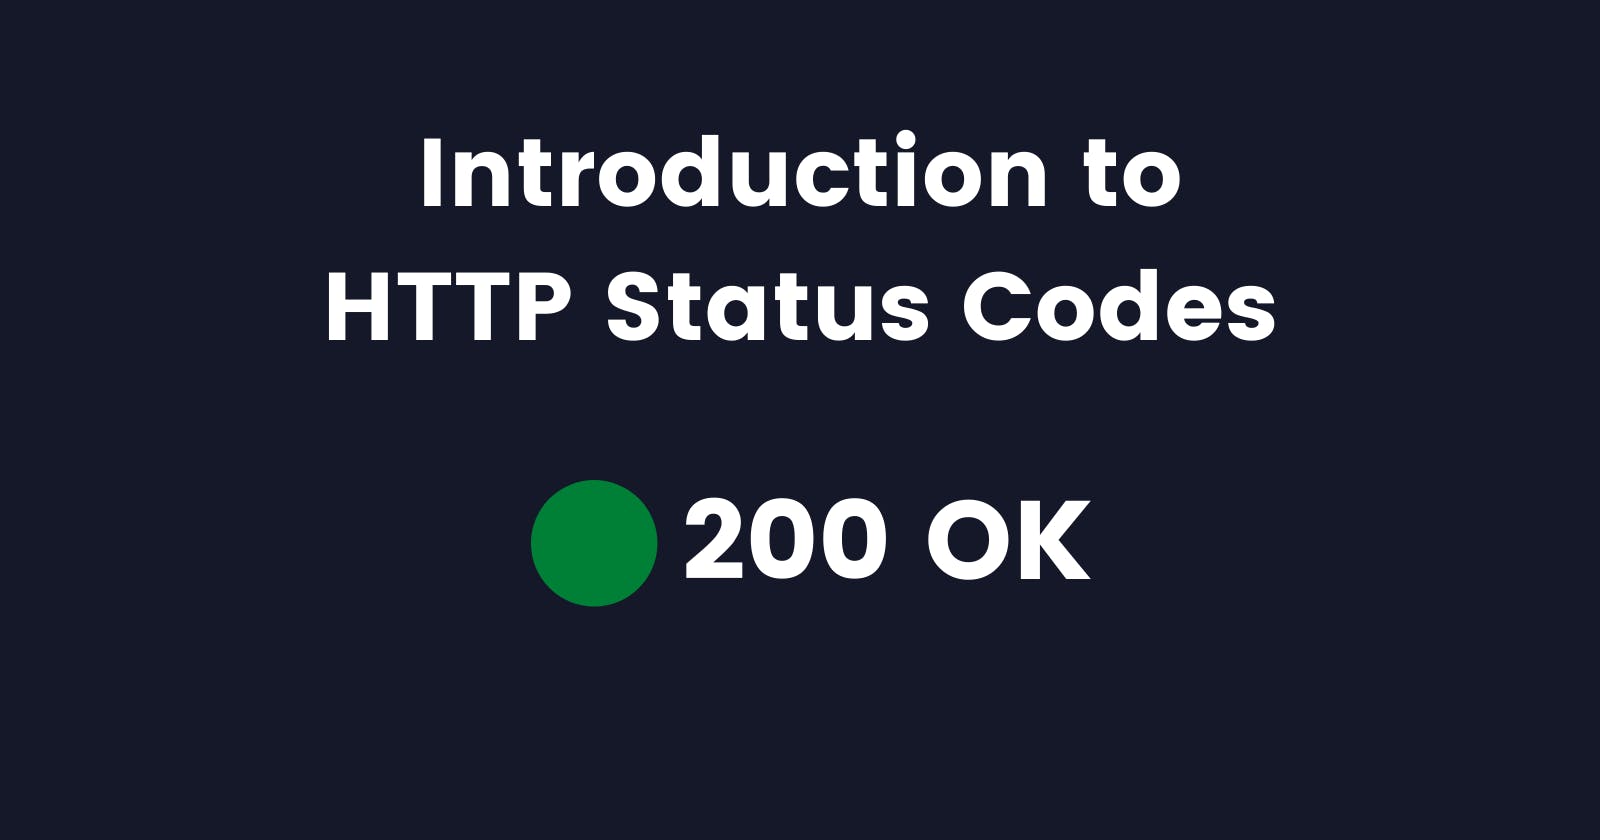 Brief Introduction to HTTP Status Codes